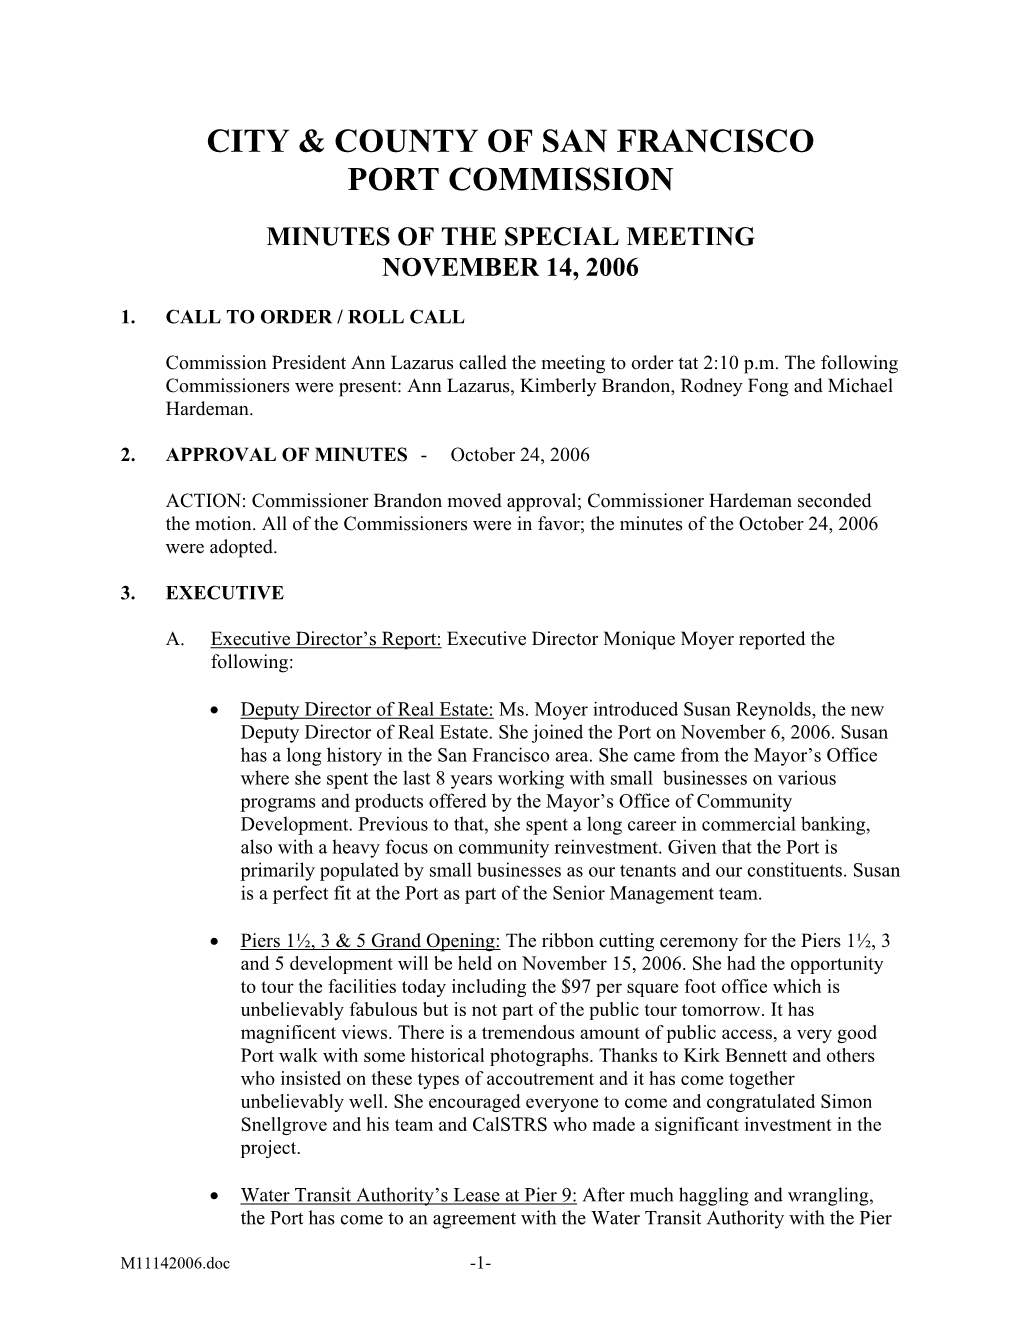 City & County of San Francisco Port Commission